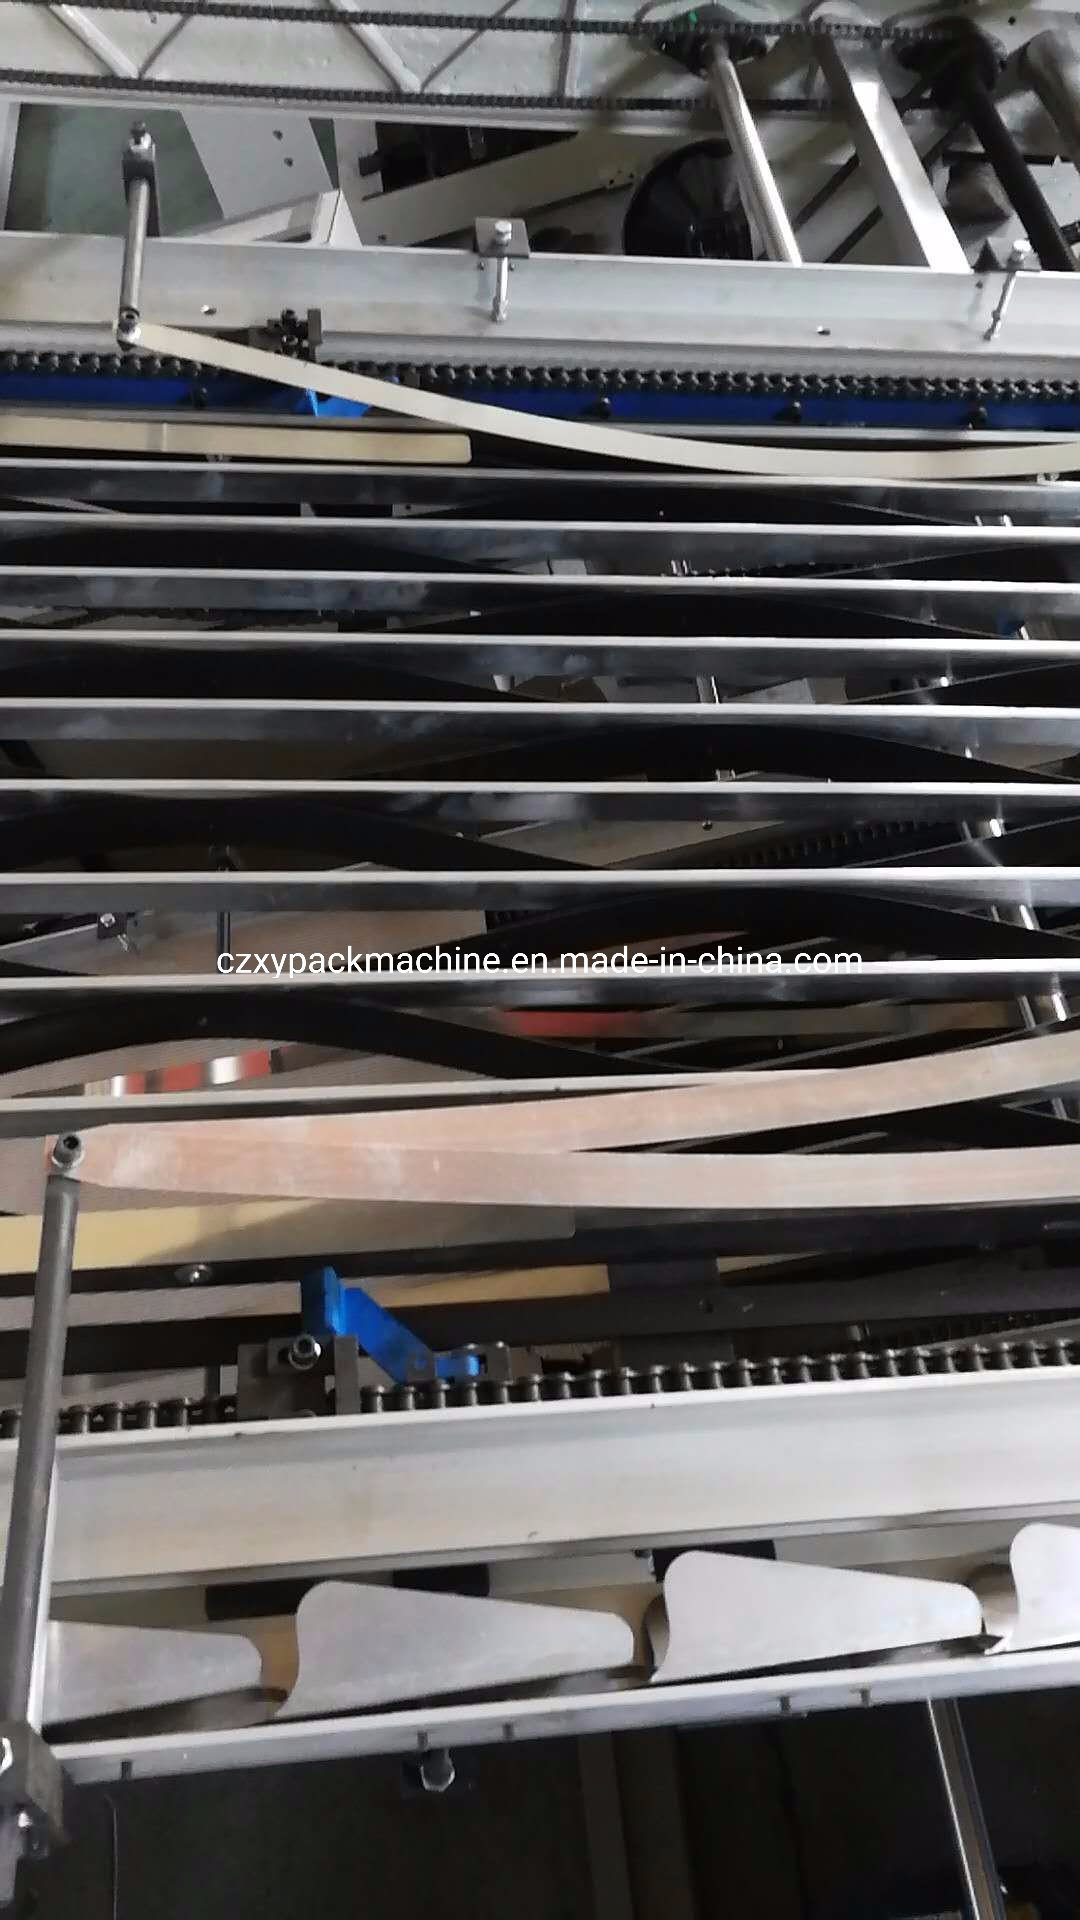 Best Quality Flute Laminator Machine for 3ply 5ply Corrugated Box Production